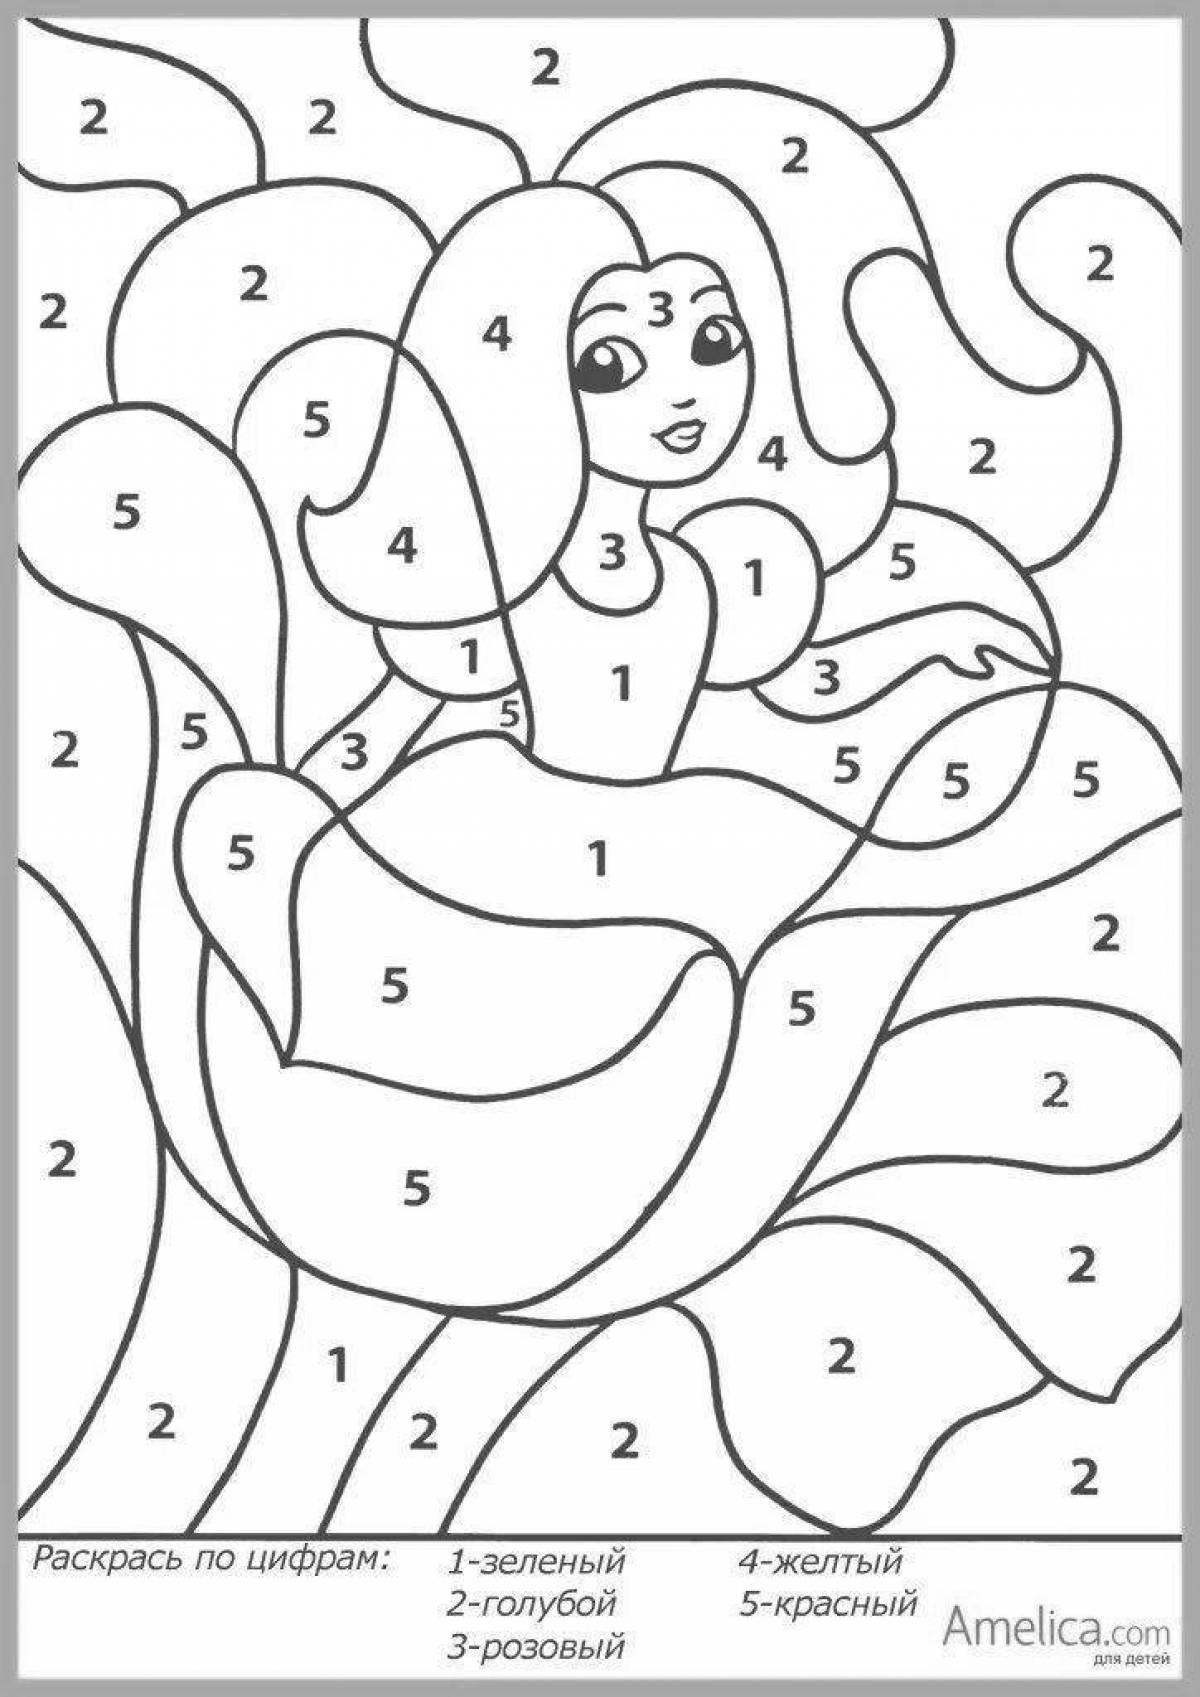 Fun coloring by numbers for 5 year olds